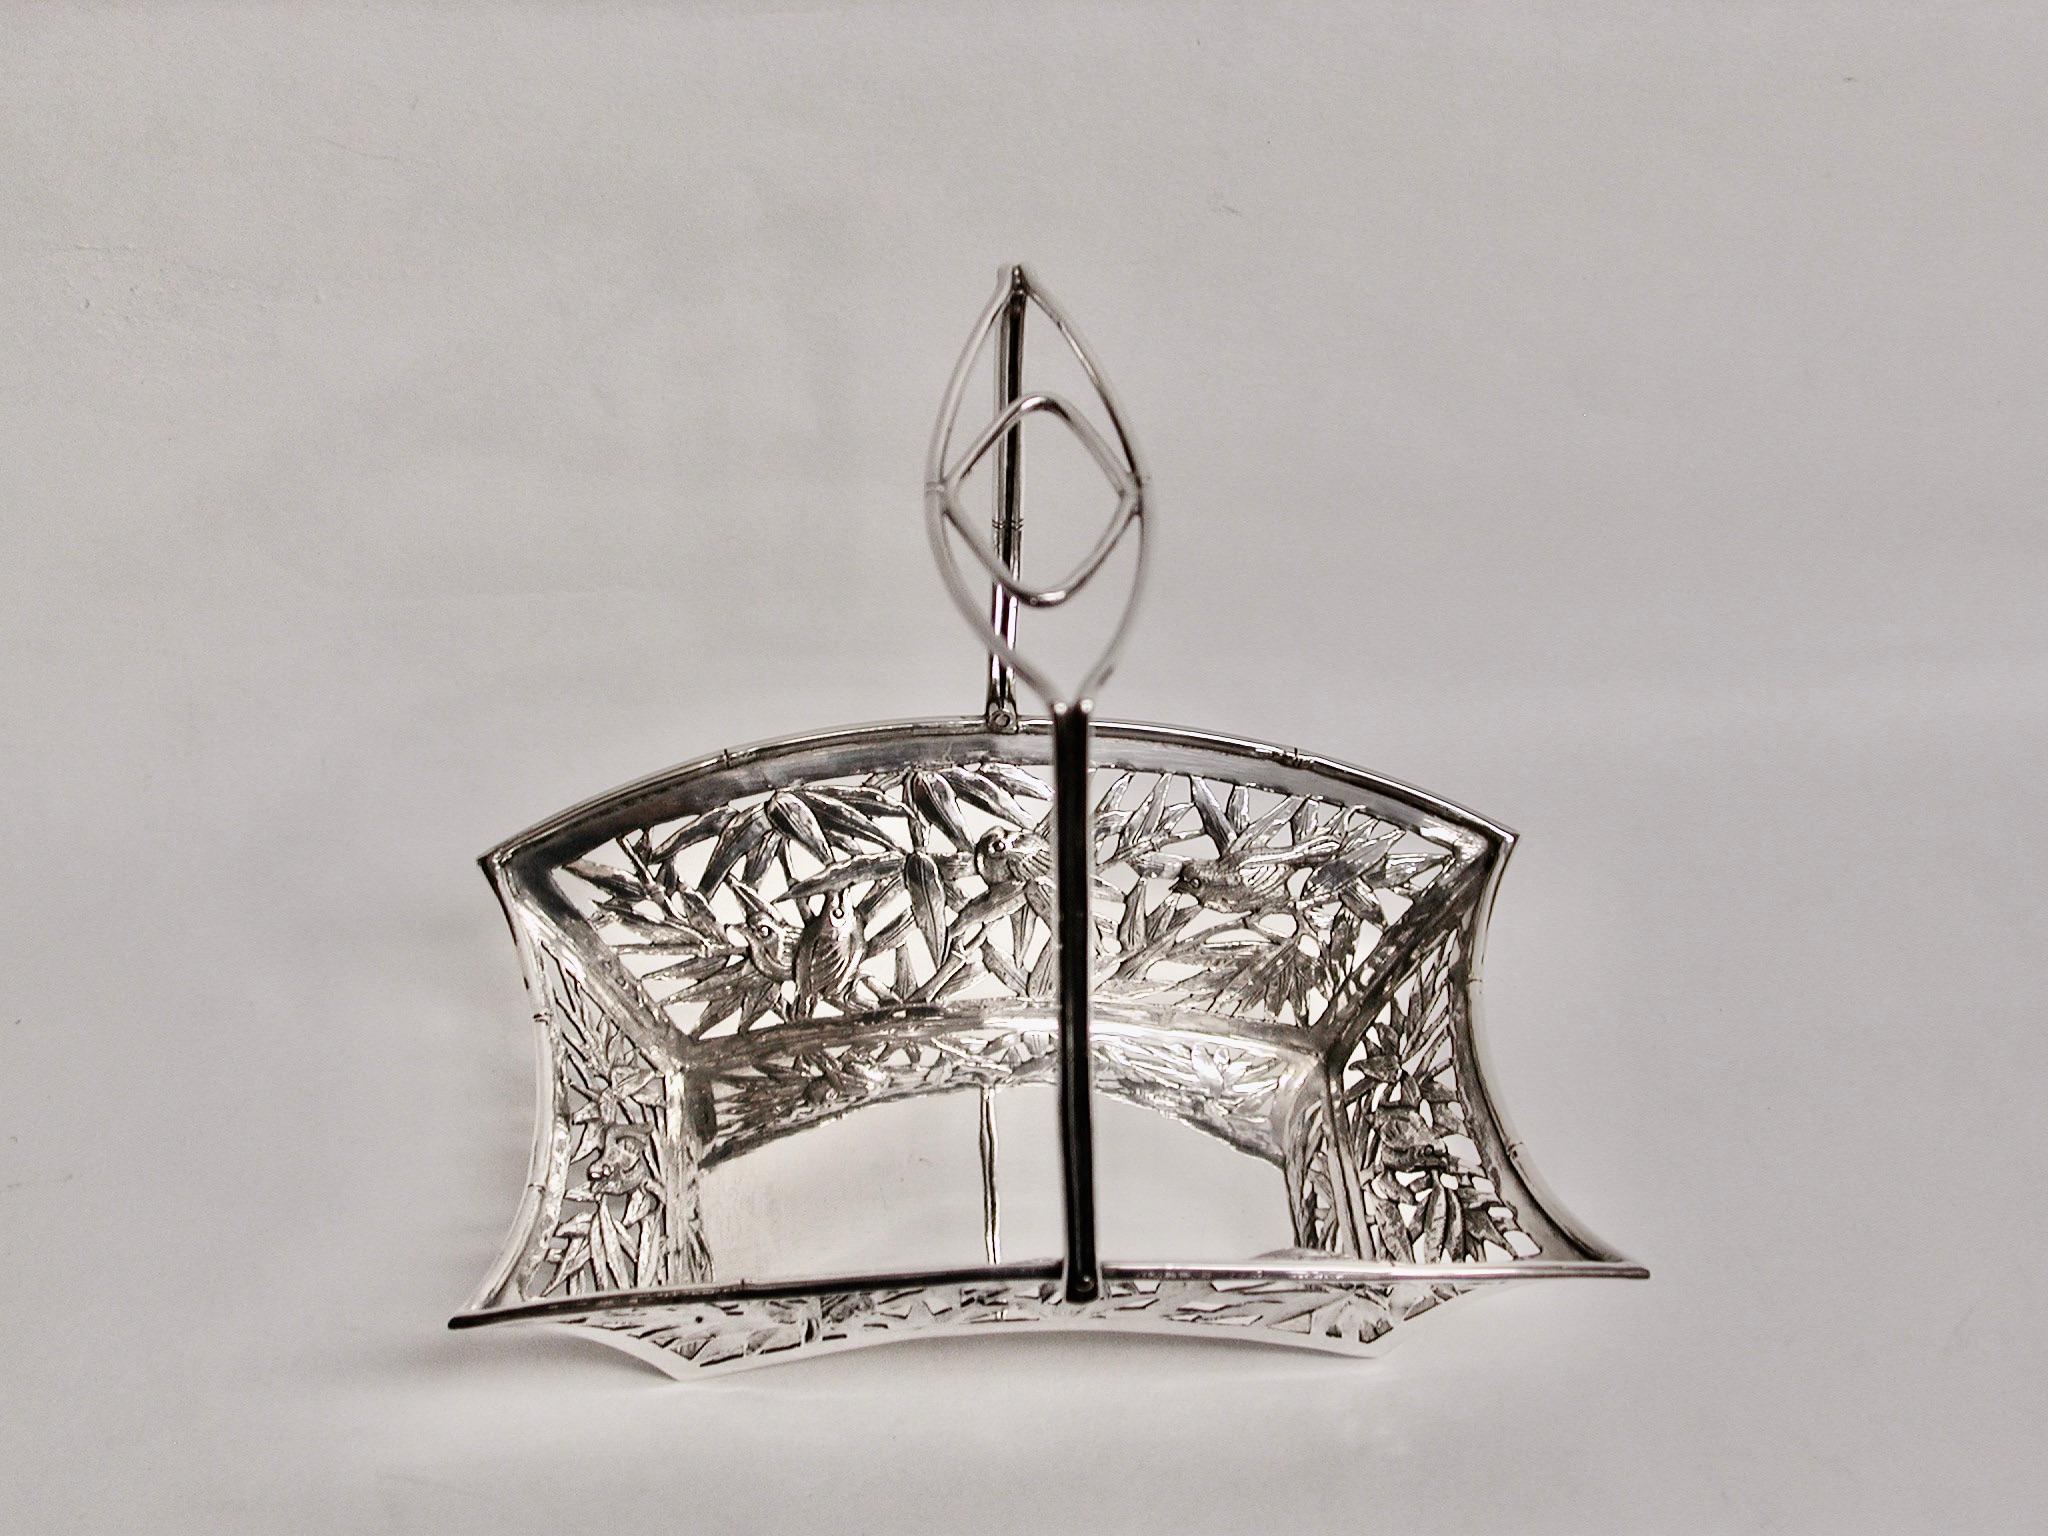 Chinese silver sweet basket with swing handle, Tuck Chang & Co, Shanghai, Circa 1900.
Lovely heavy quality piercing and embossing depicting several birds, bamboo and bamboo leaves.
Tuck Chang was a prolific Chinese silversmith in the last quarter